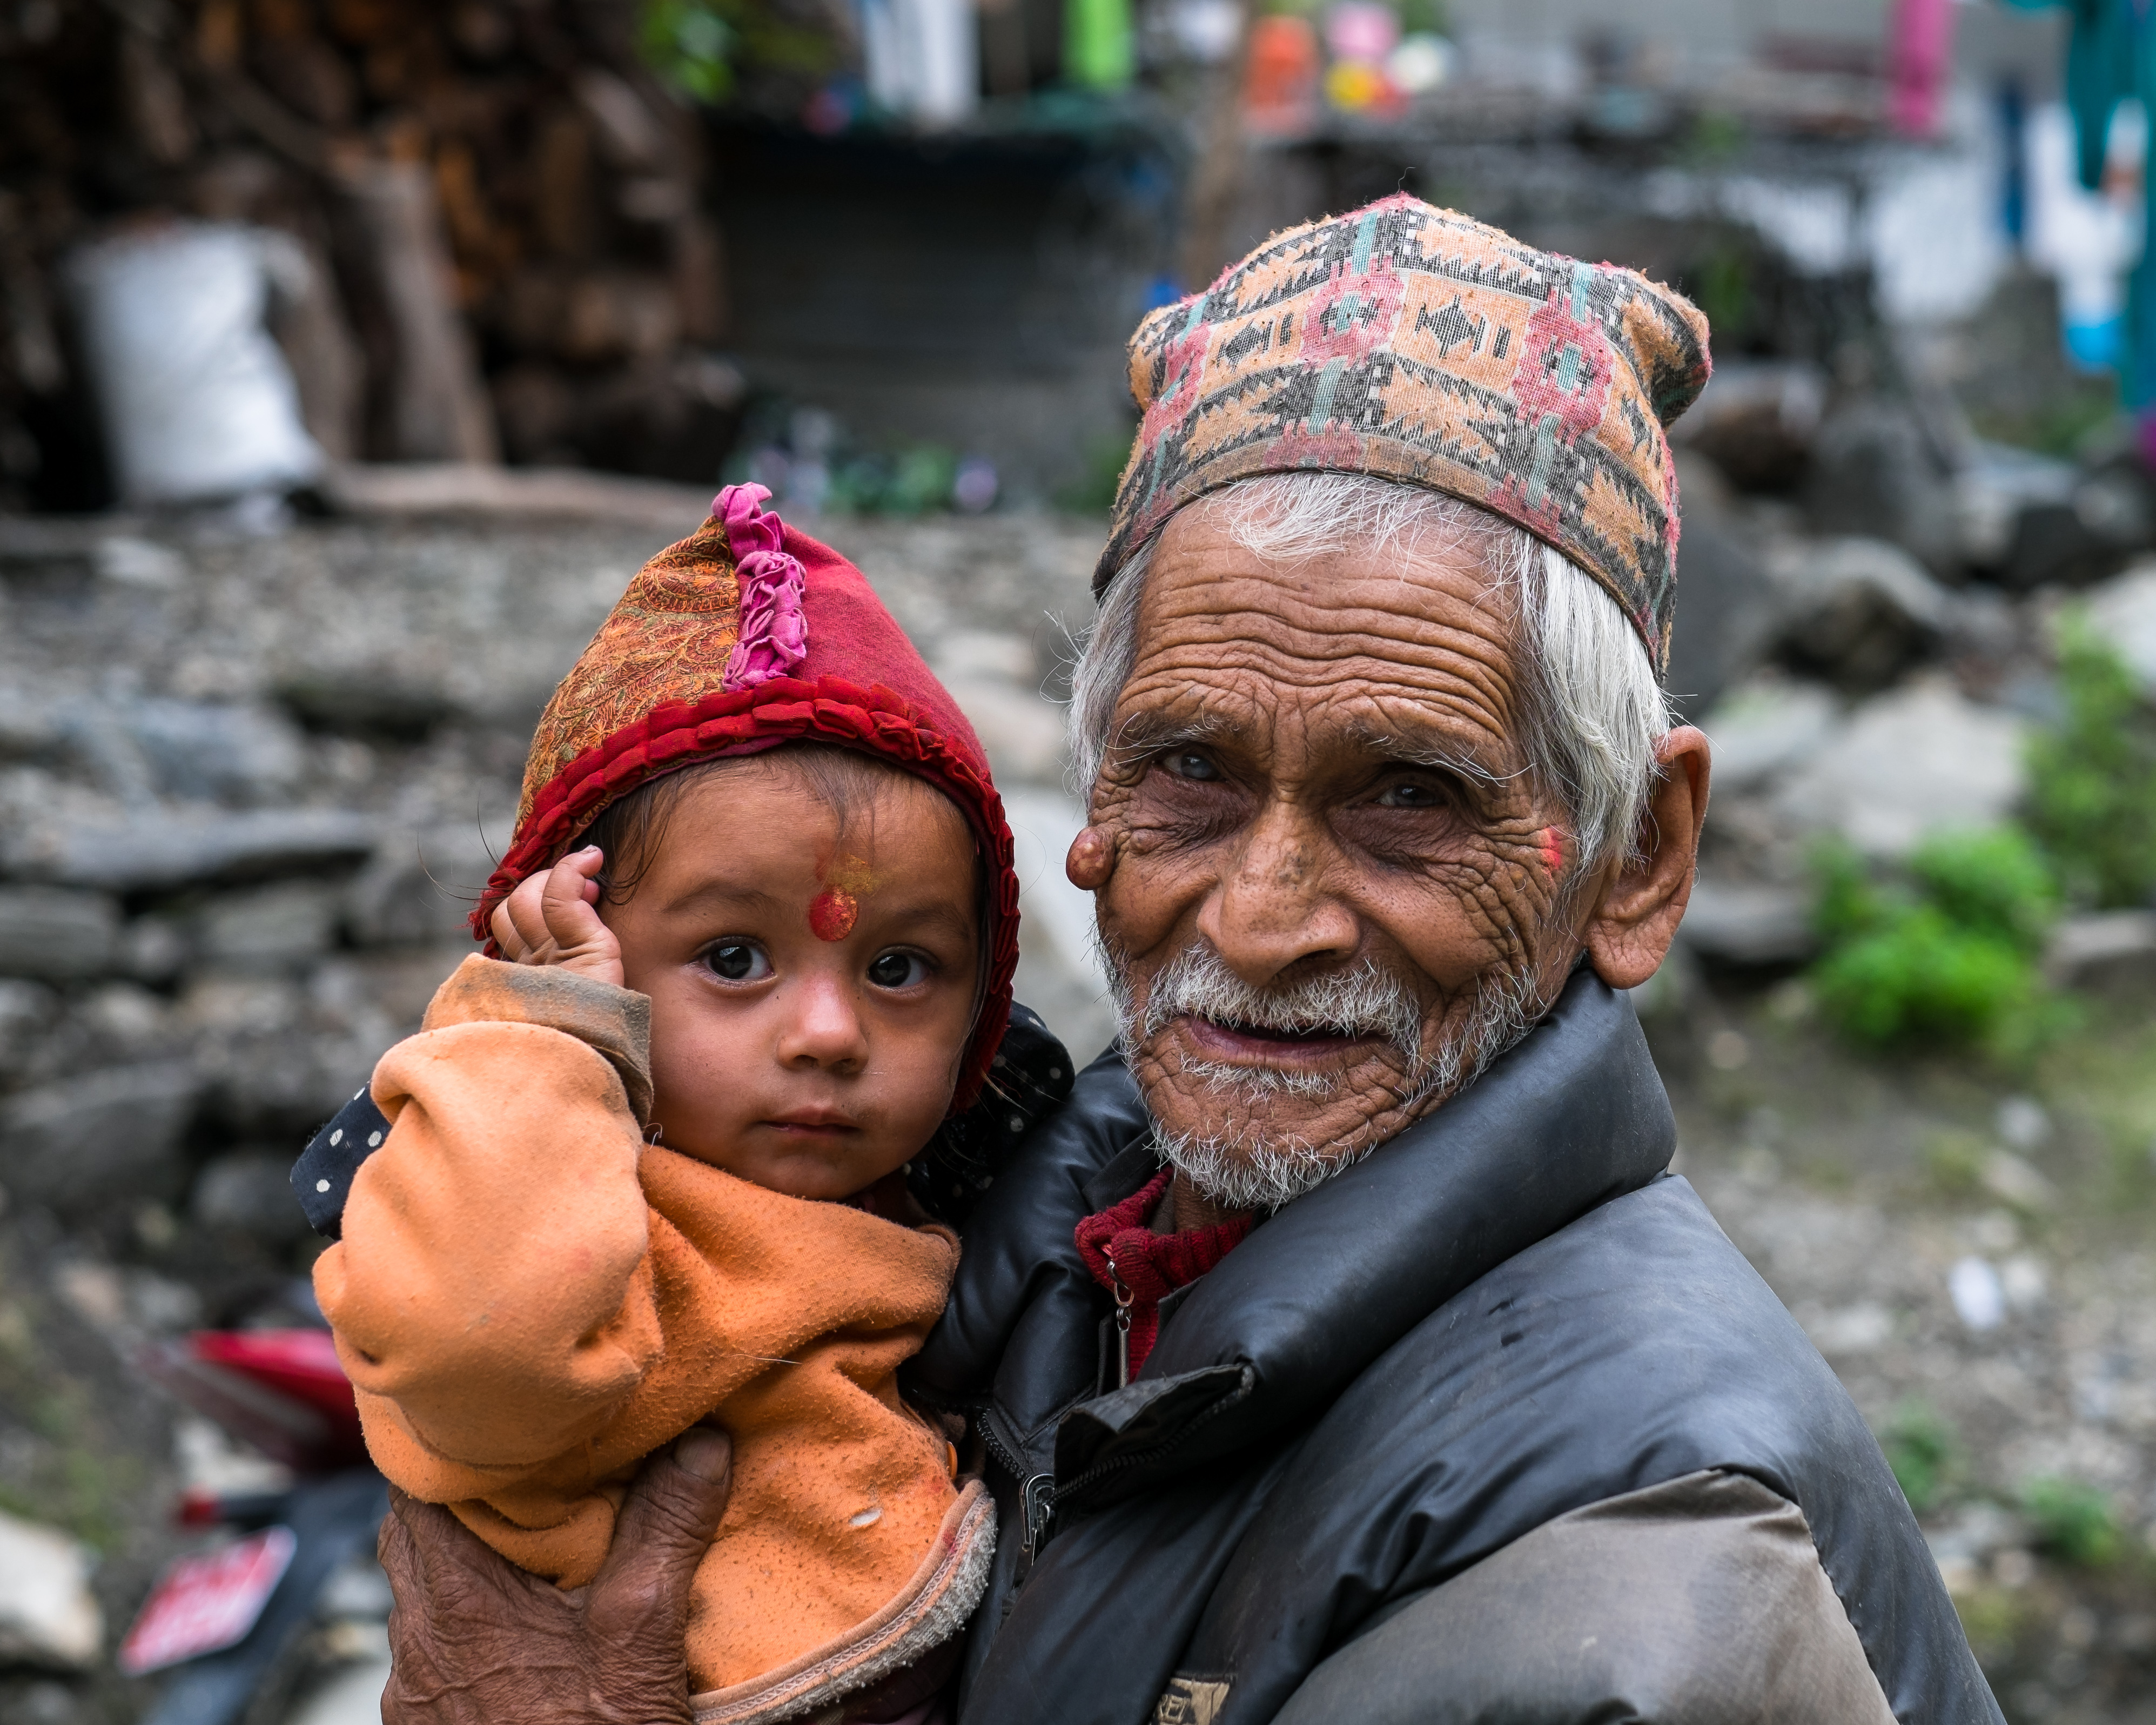 Buy a Print for Nepal Earthquake Relief